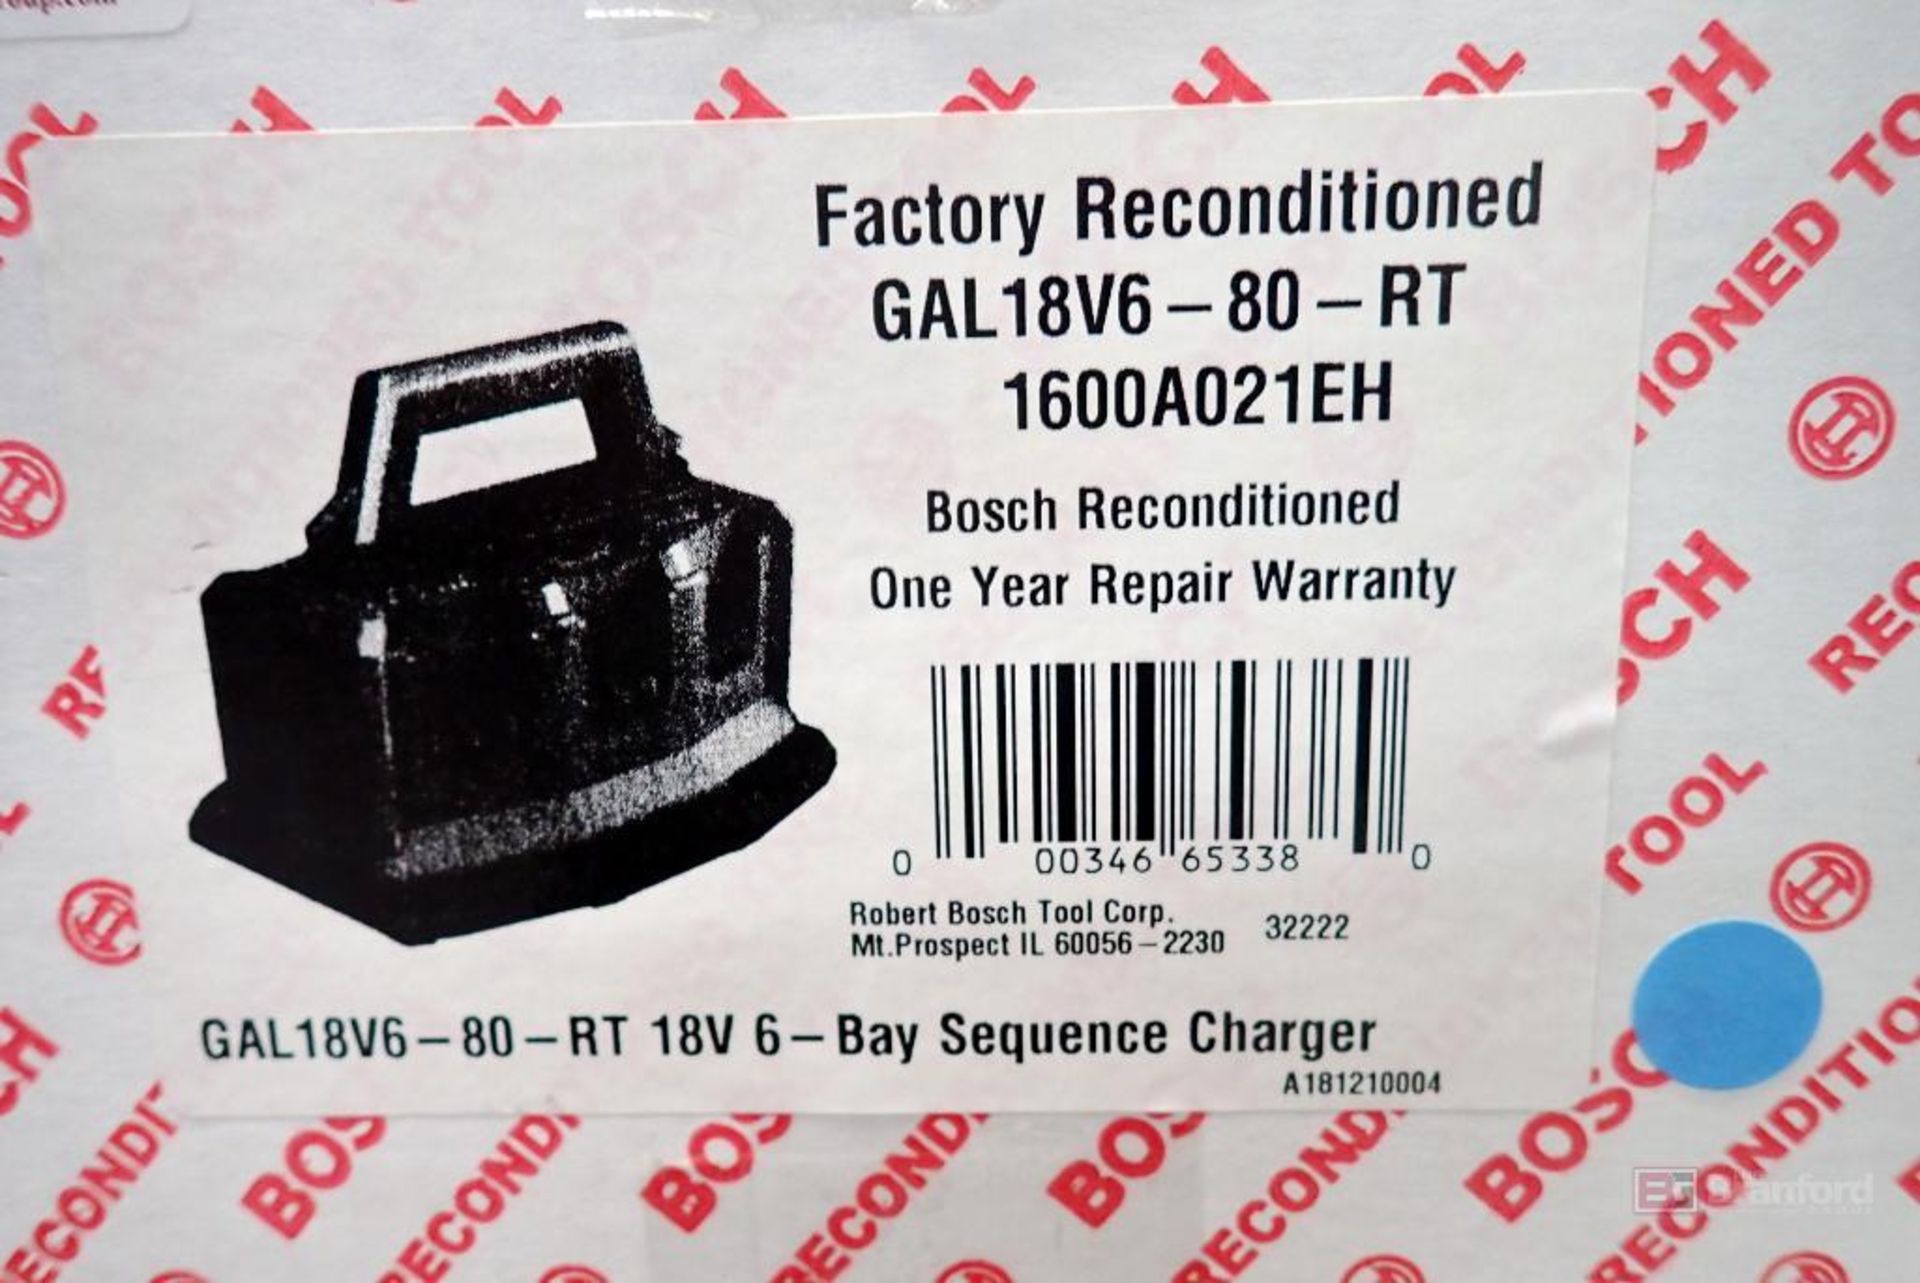 Bosch GAL18V6-80-RT 6-Bay Sequence Charger - Image 2 of 3